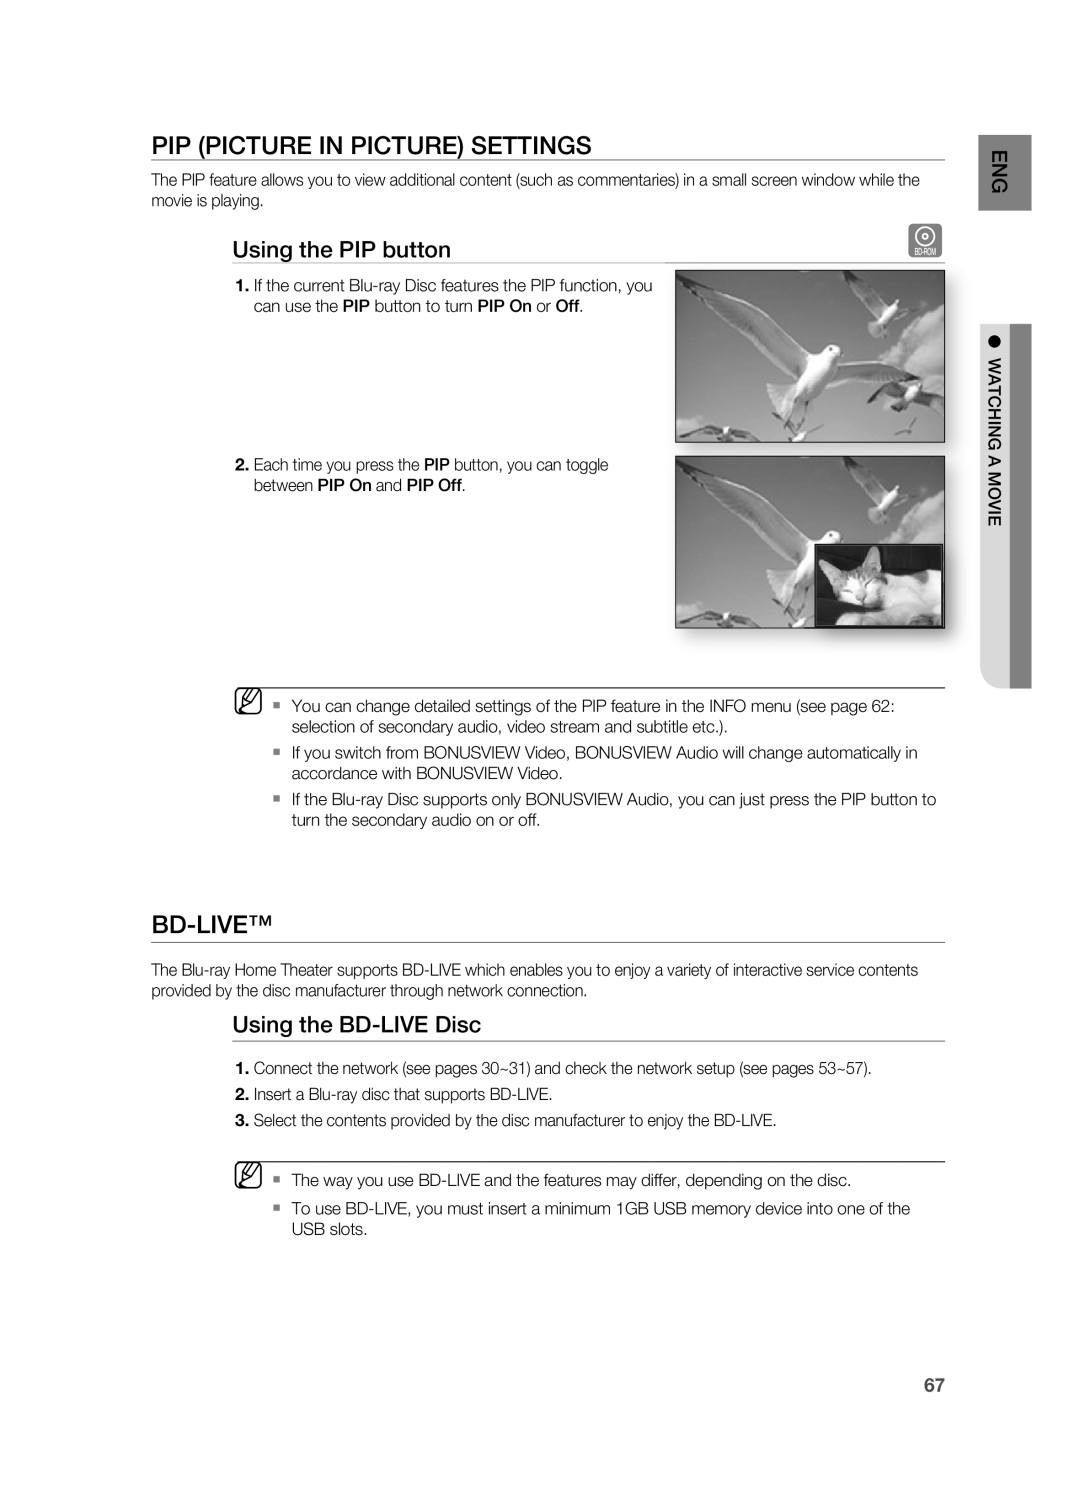 Samsung HT-BD3252 user manual Pip Picture In Picture Settings, Bd-Live, Using the PIP button, Using the BD-LIVEDisc 